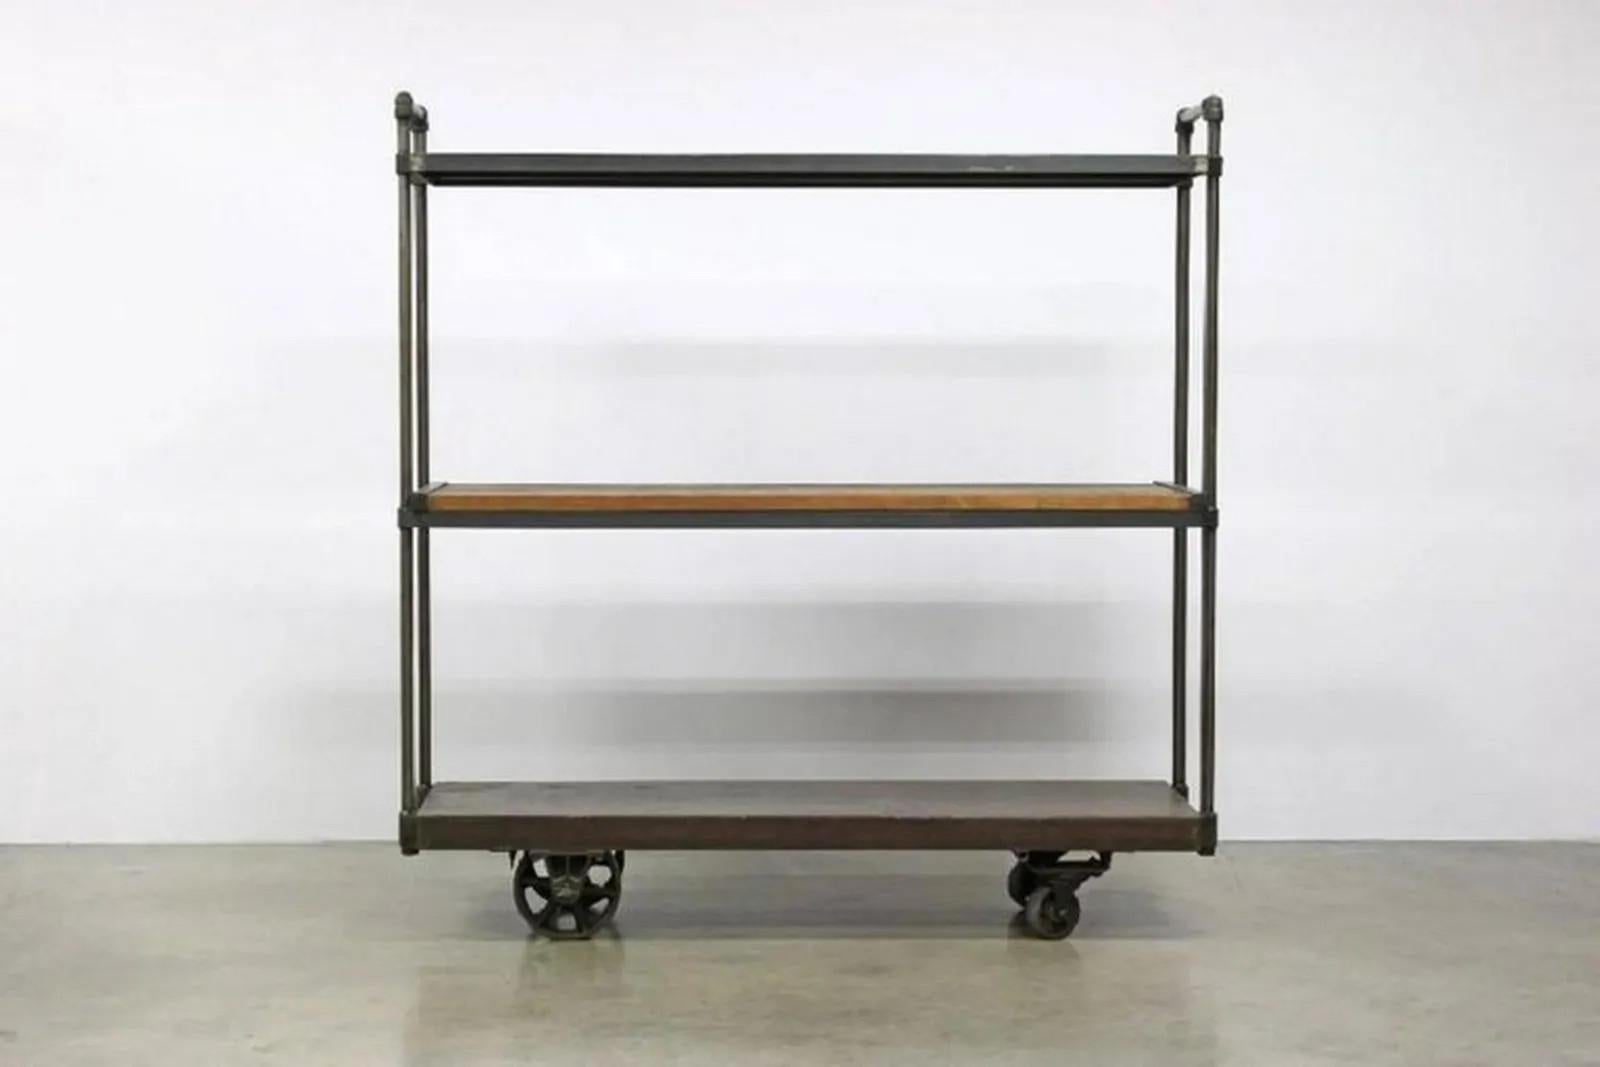 Large triple shelf for clothing storage or store display. Made from iron and reclaimed wood. Measure: Height 78 inches, depth 25inches, width 76 inches.